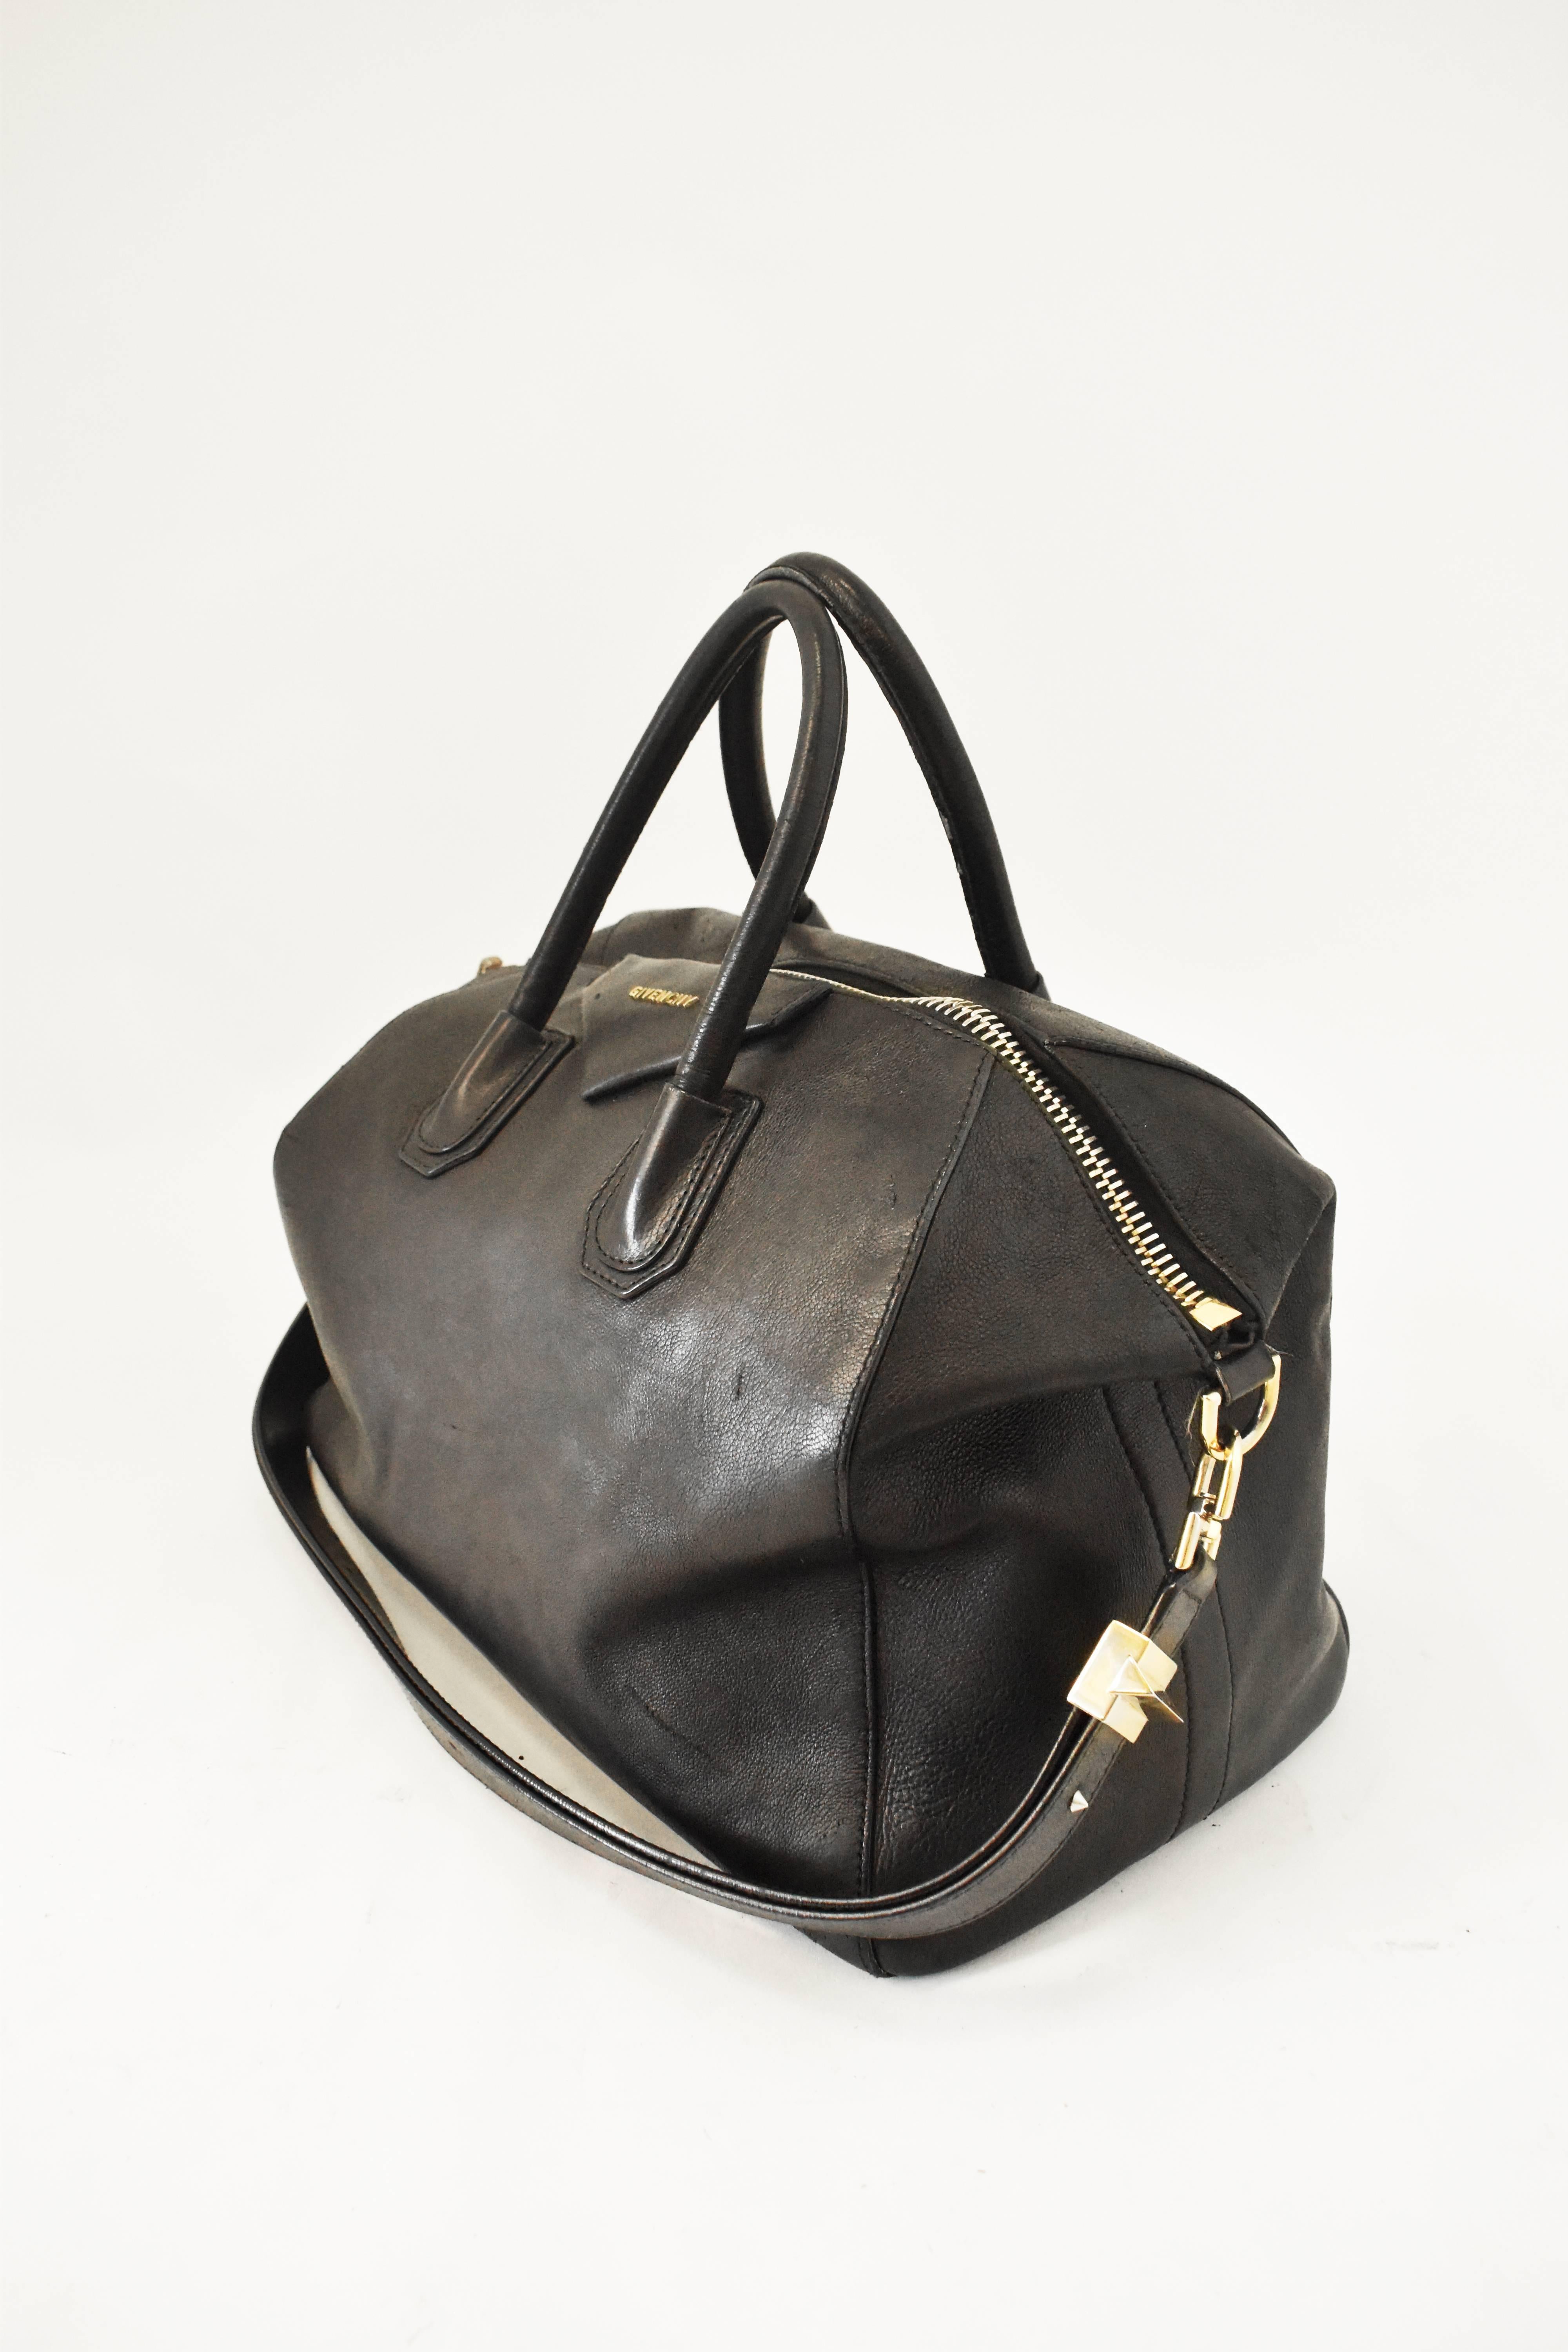 A medium sized leather handbag from Givenchy. It has a boxy doctor’s bag sort of shape with two top handles and large zip across the top. It also has a shoulder strap with gold hardware that can be lengthened and worn across the body. The bag is